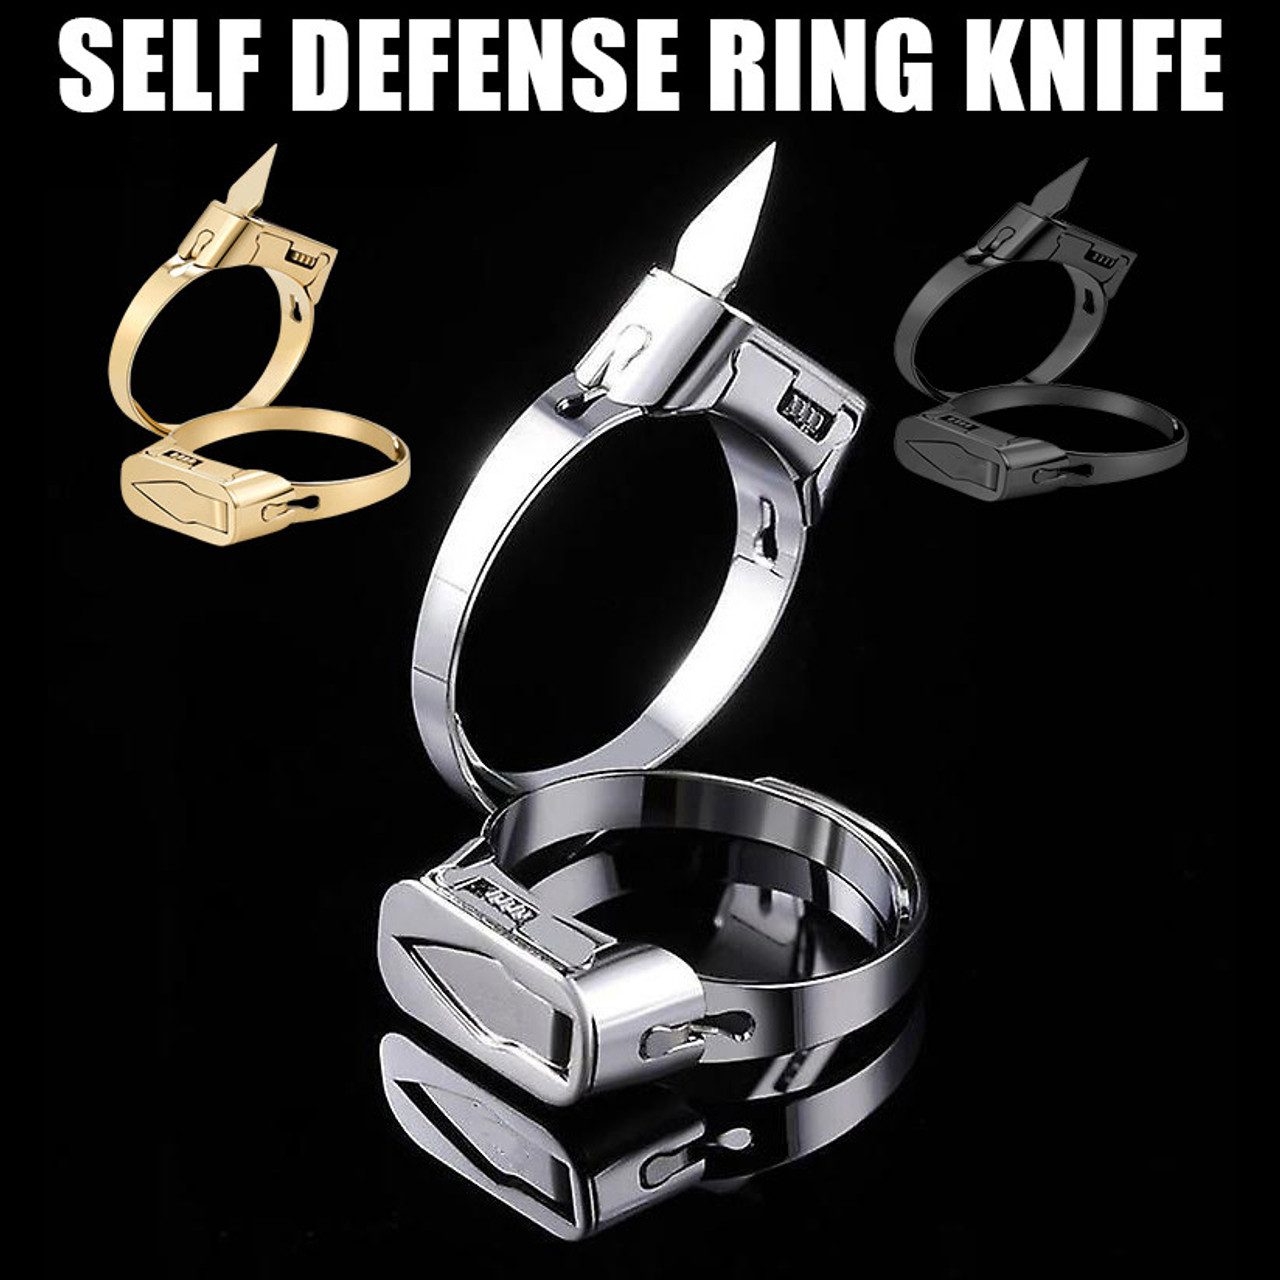 https://cdn11.bigcommerce.com/s-blqh8ck/images/stencil/1280x1280/products/5535/25678/Ring_Knife_Silver_Blade_copy__50737__43652.1676352190.jpg?c=2&imbypass=on